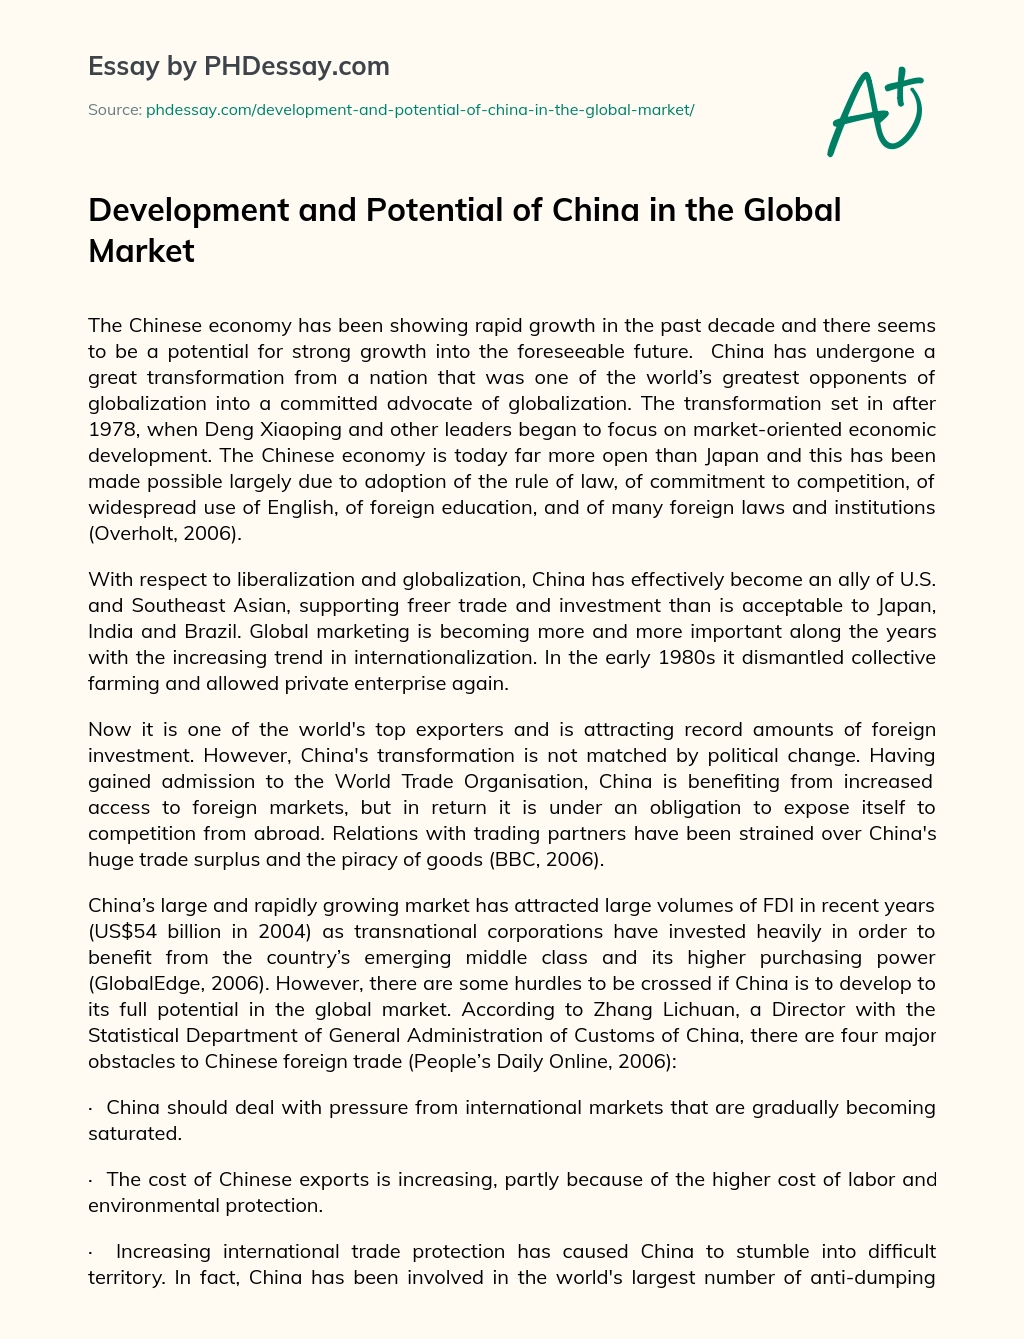 Development and Potential of China in the Global Market essay